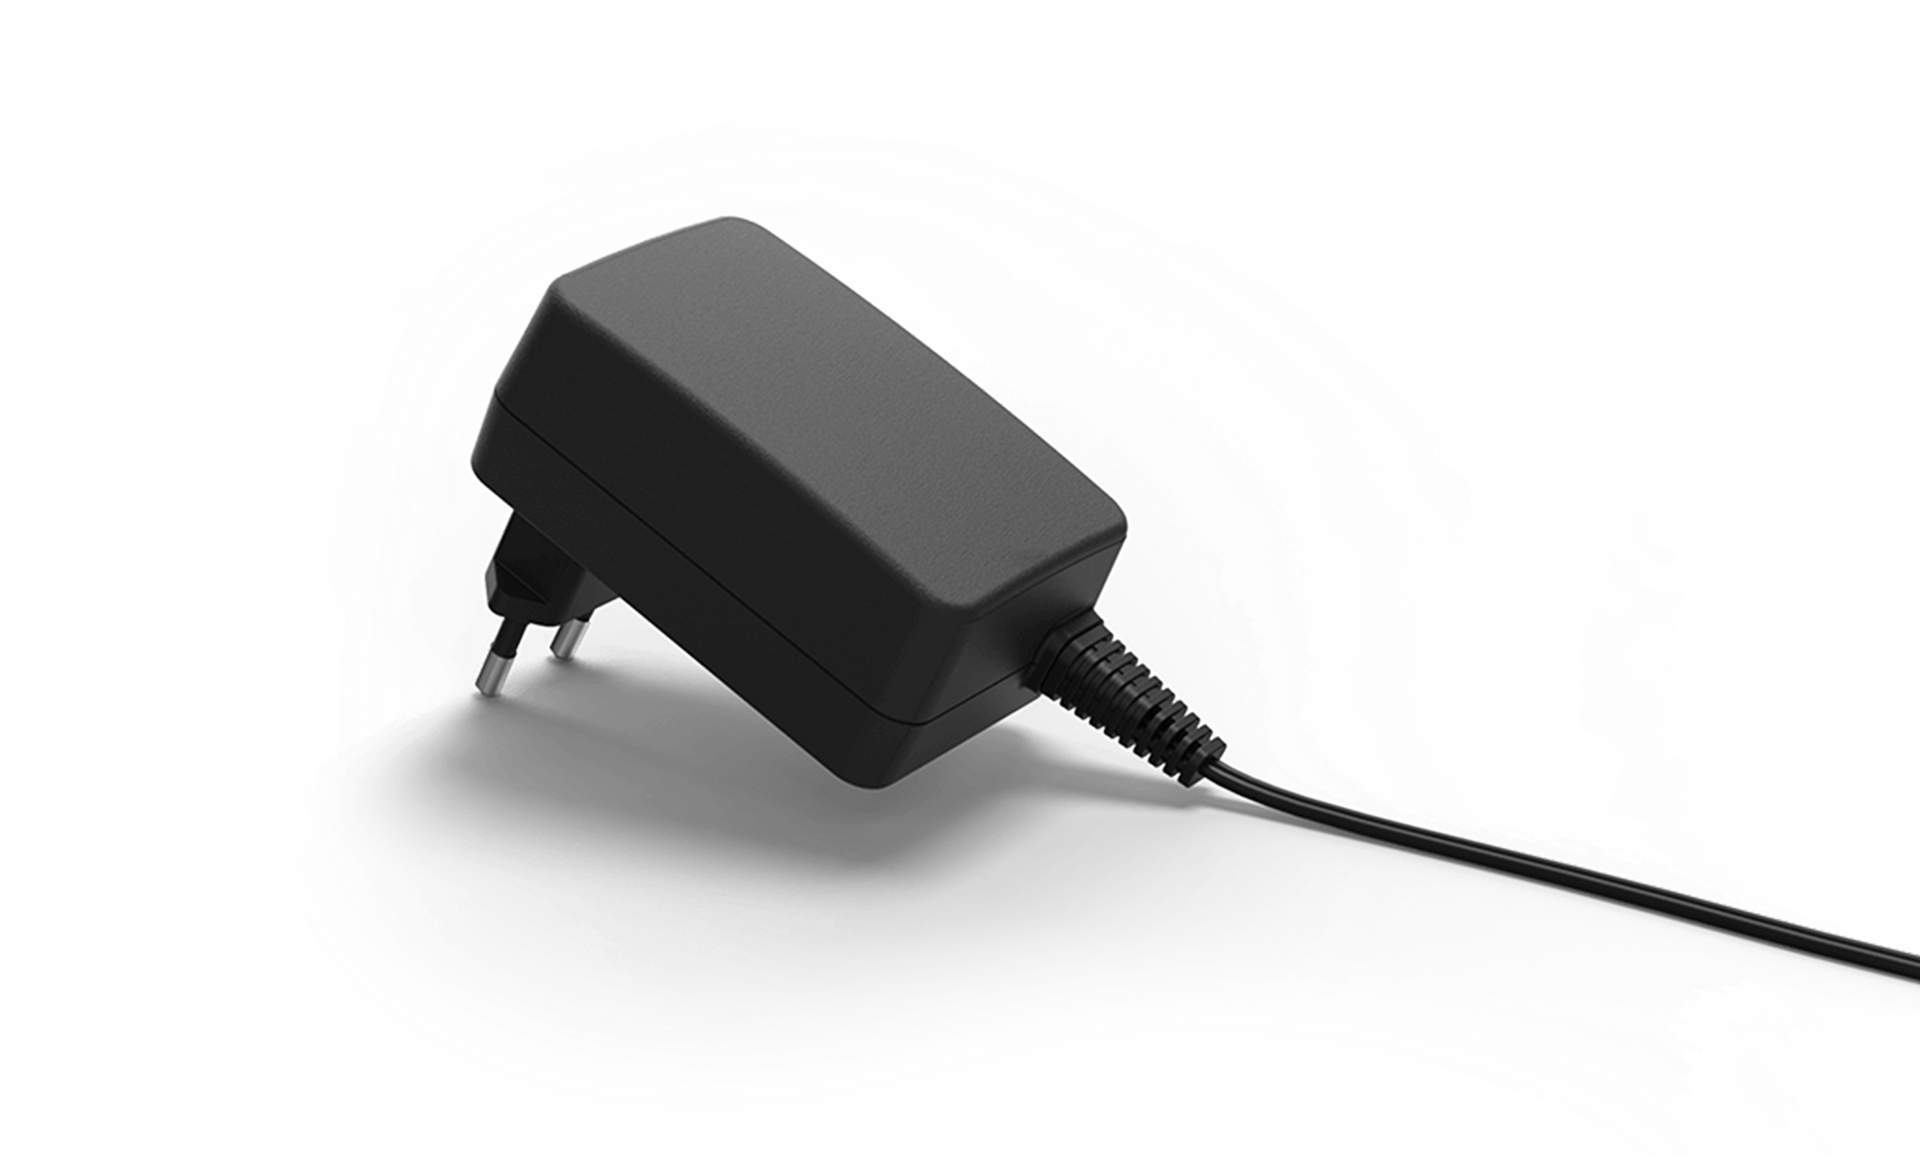 A black power supply with a cord attached to it on a white background.